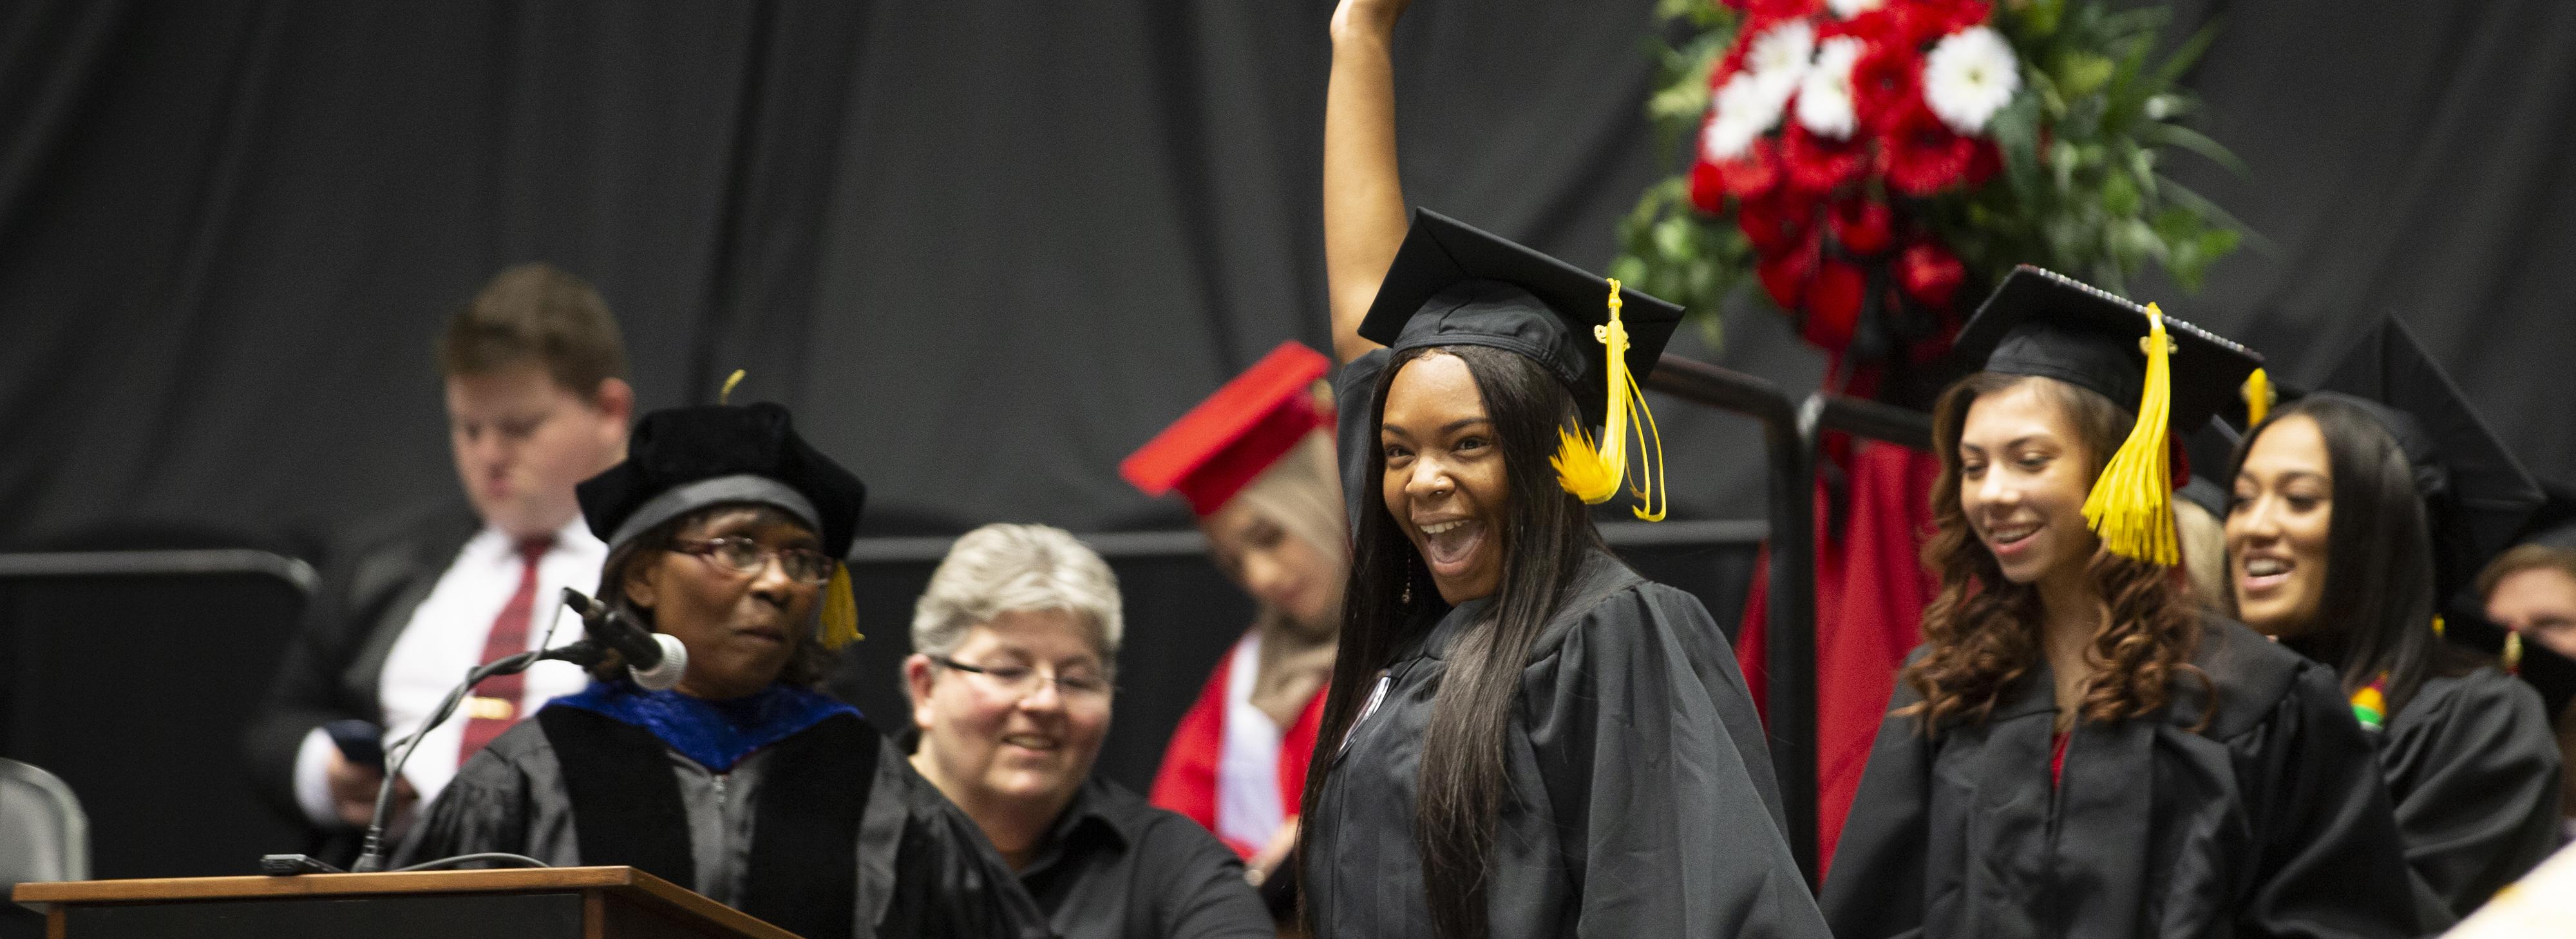 How to RSVP and Attend Ceremony NIU Commencement